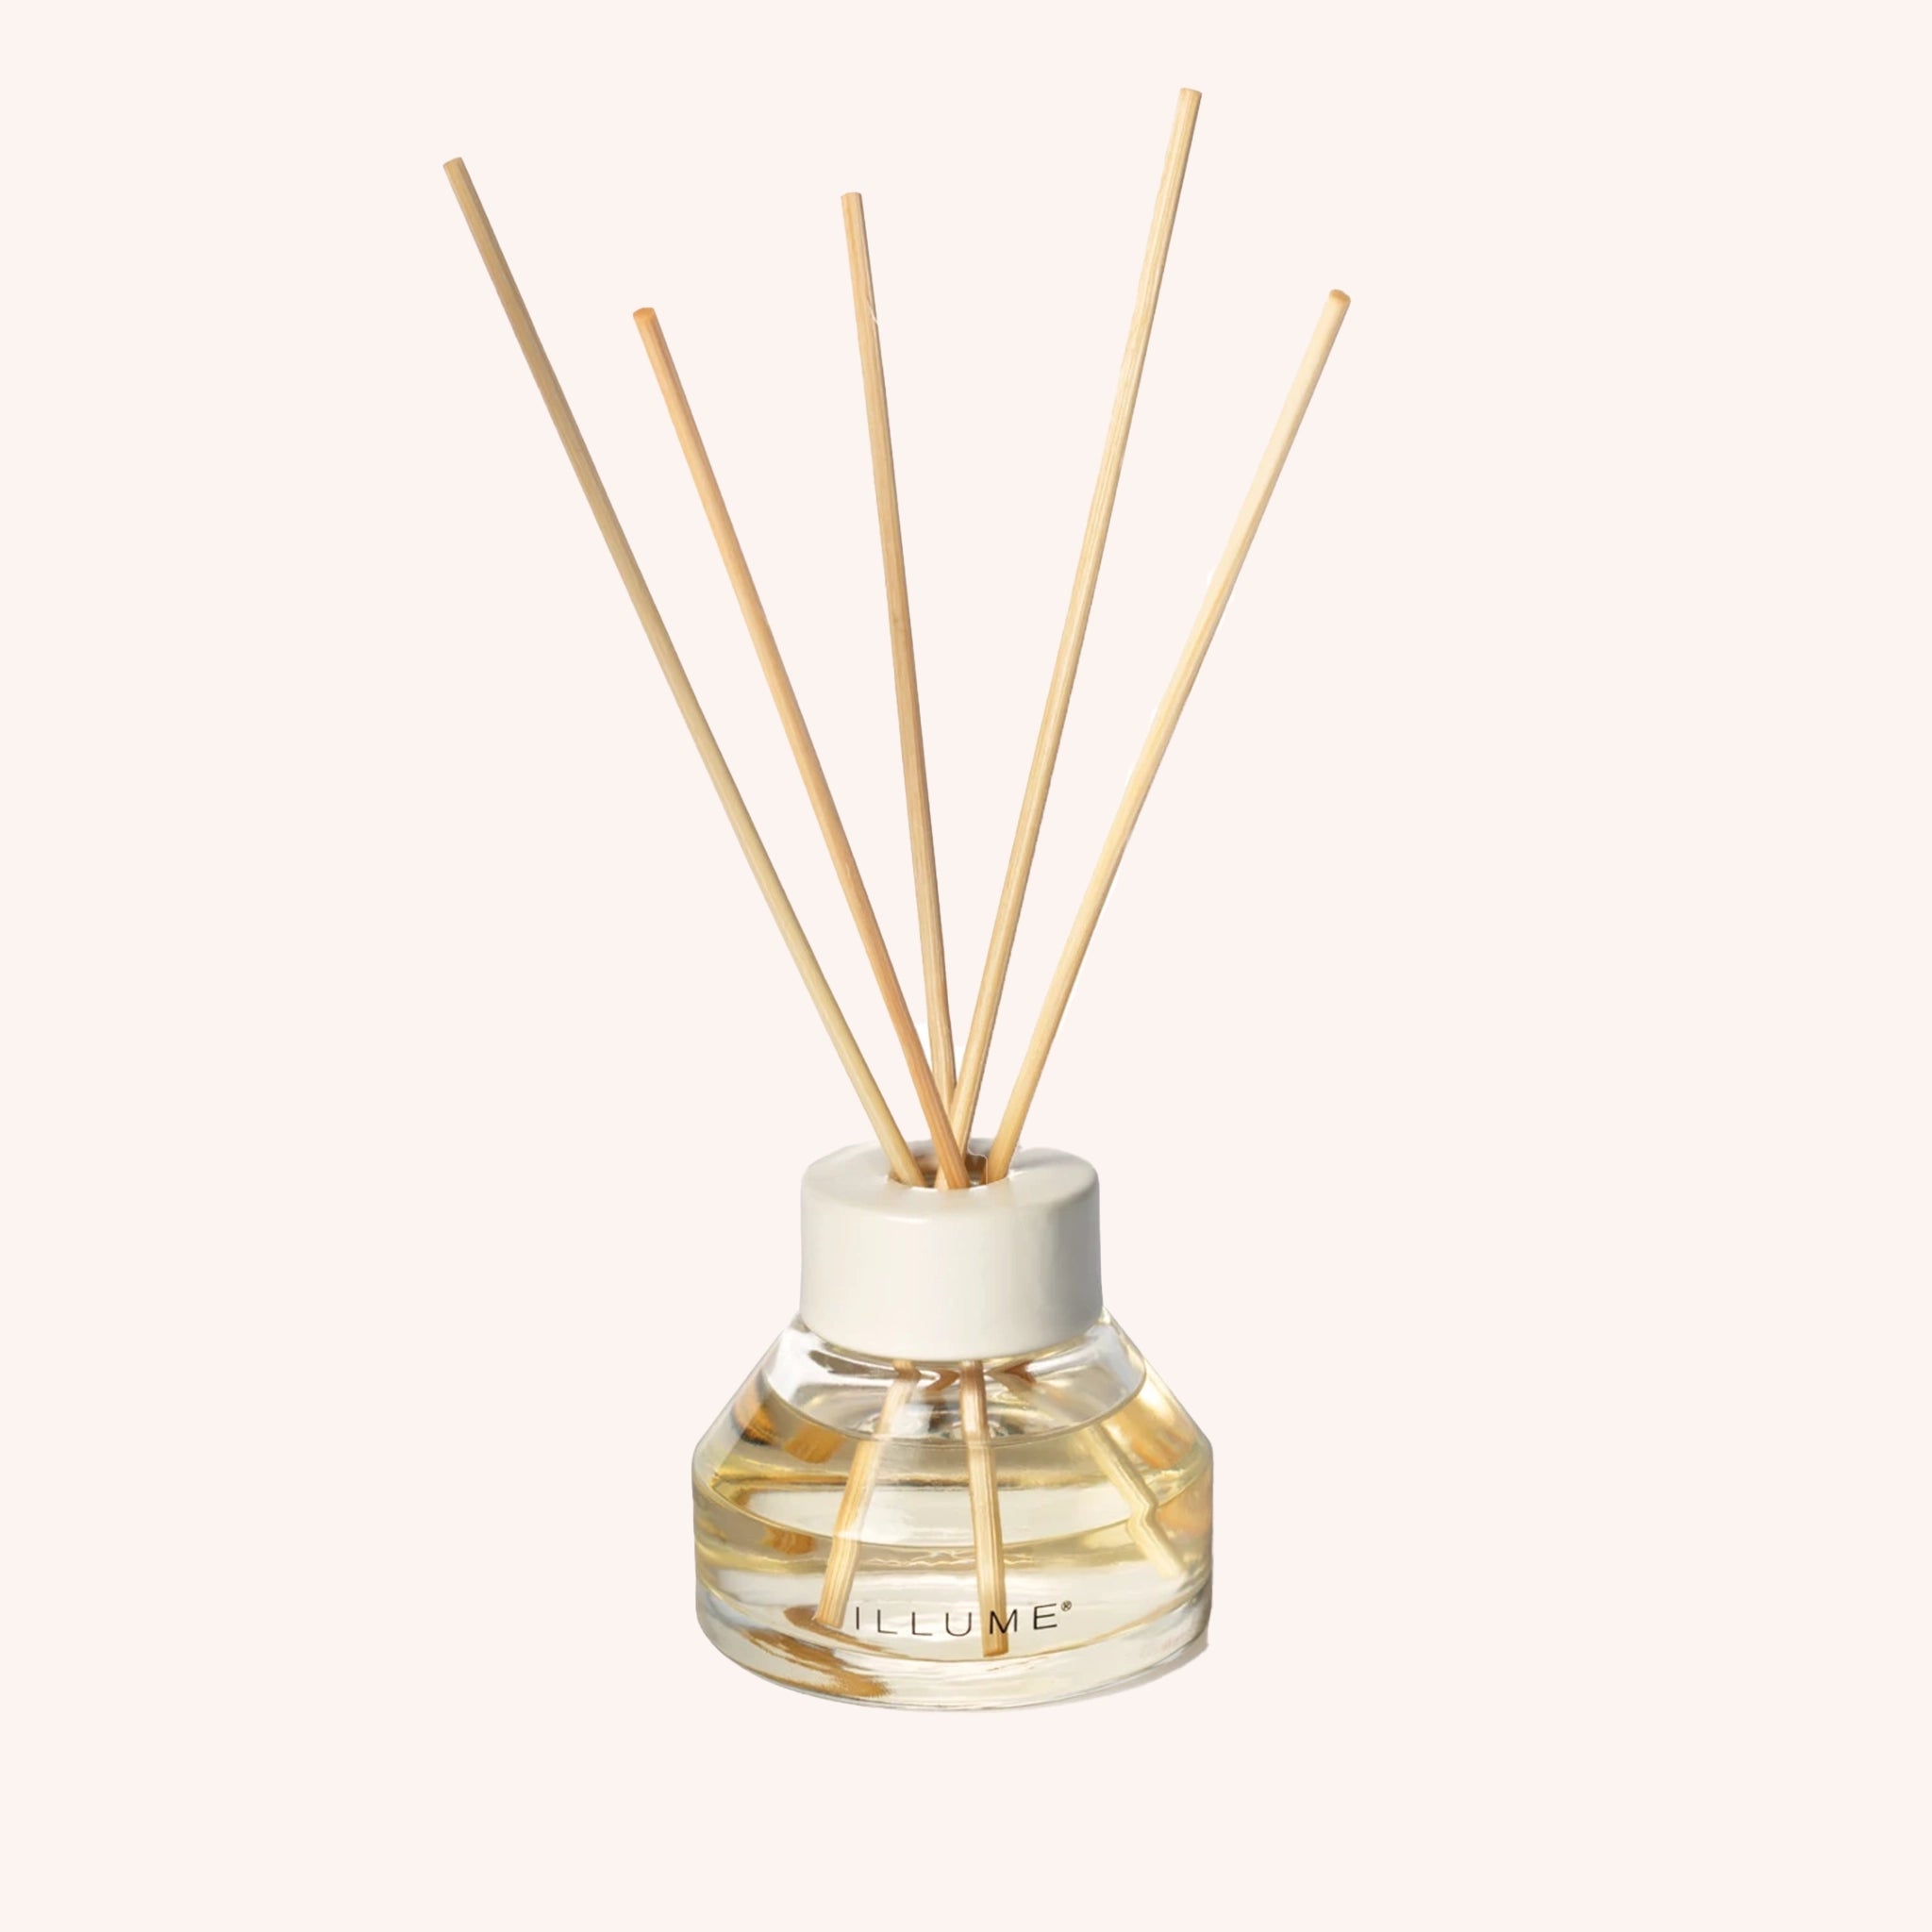 A oil diffuser with a clear glass filled with scented oil a clean cream colored lid and five neutral wood reeds stemming out from the top.